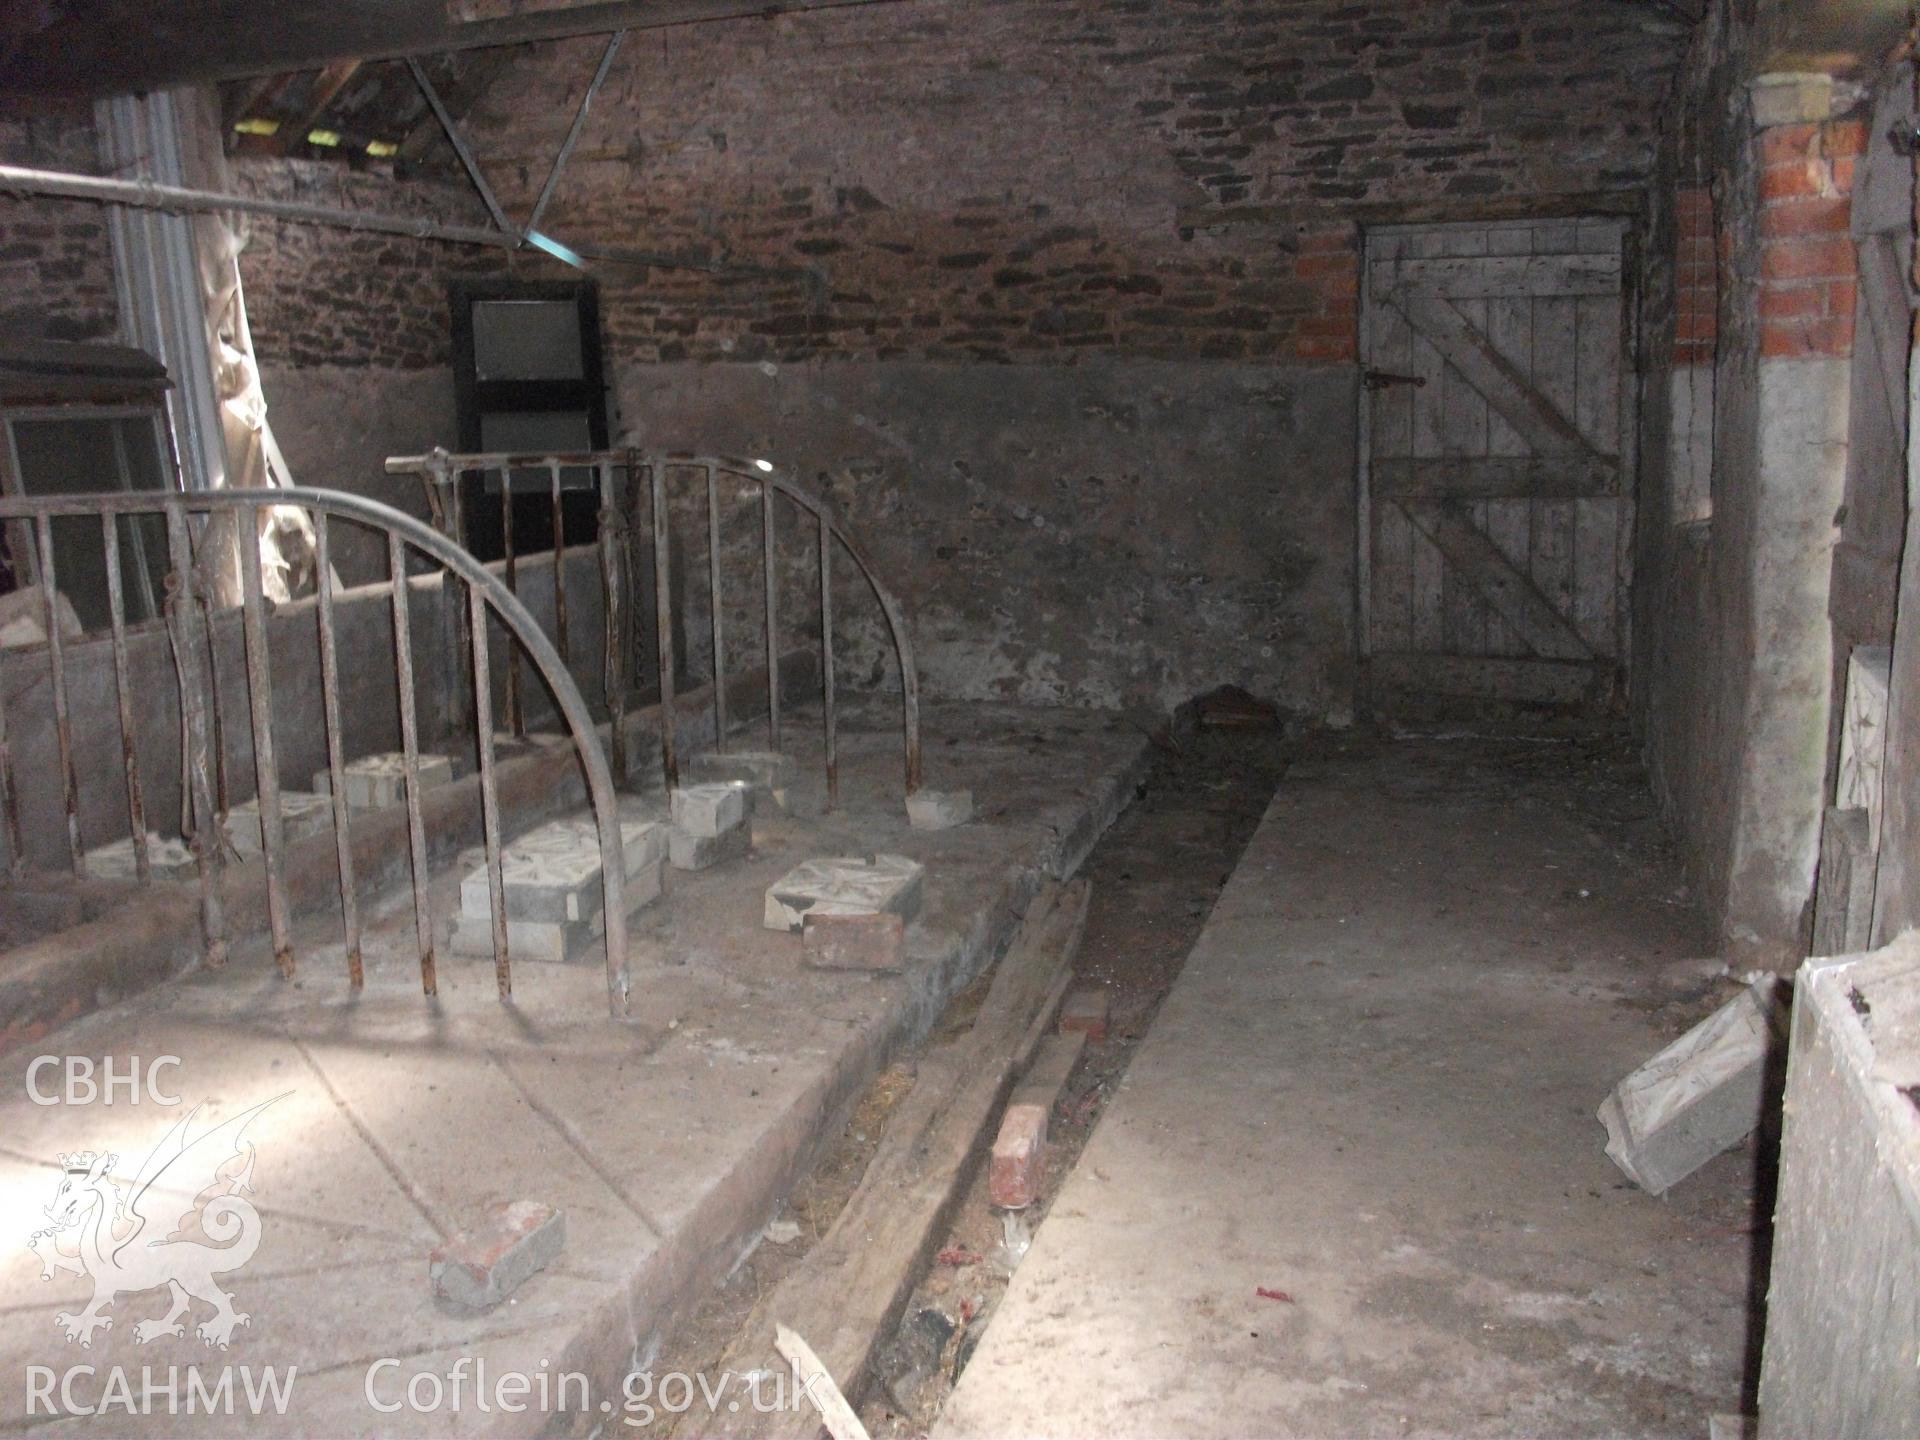 Colour digital photograph of interior of barn - milking parlour; at Llangwm Isaf Farm, received in the course of Emergency Recording case ref no RCS2/1/1599.